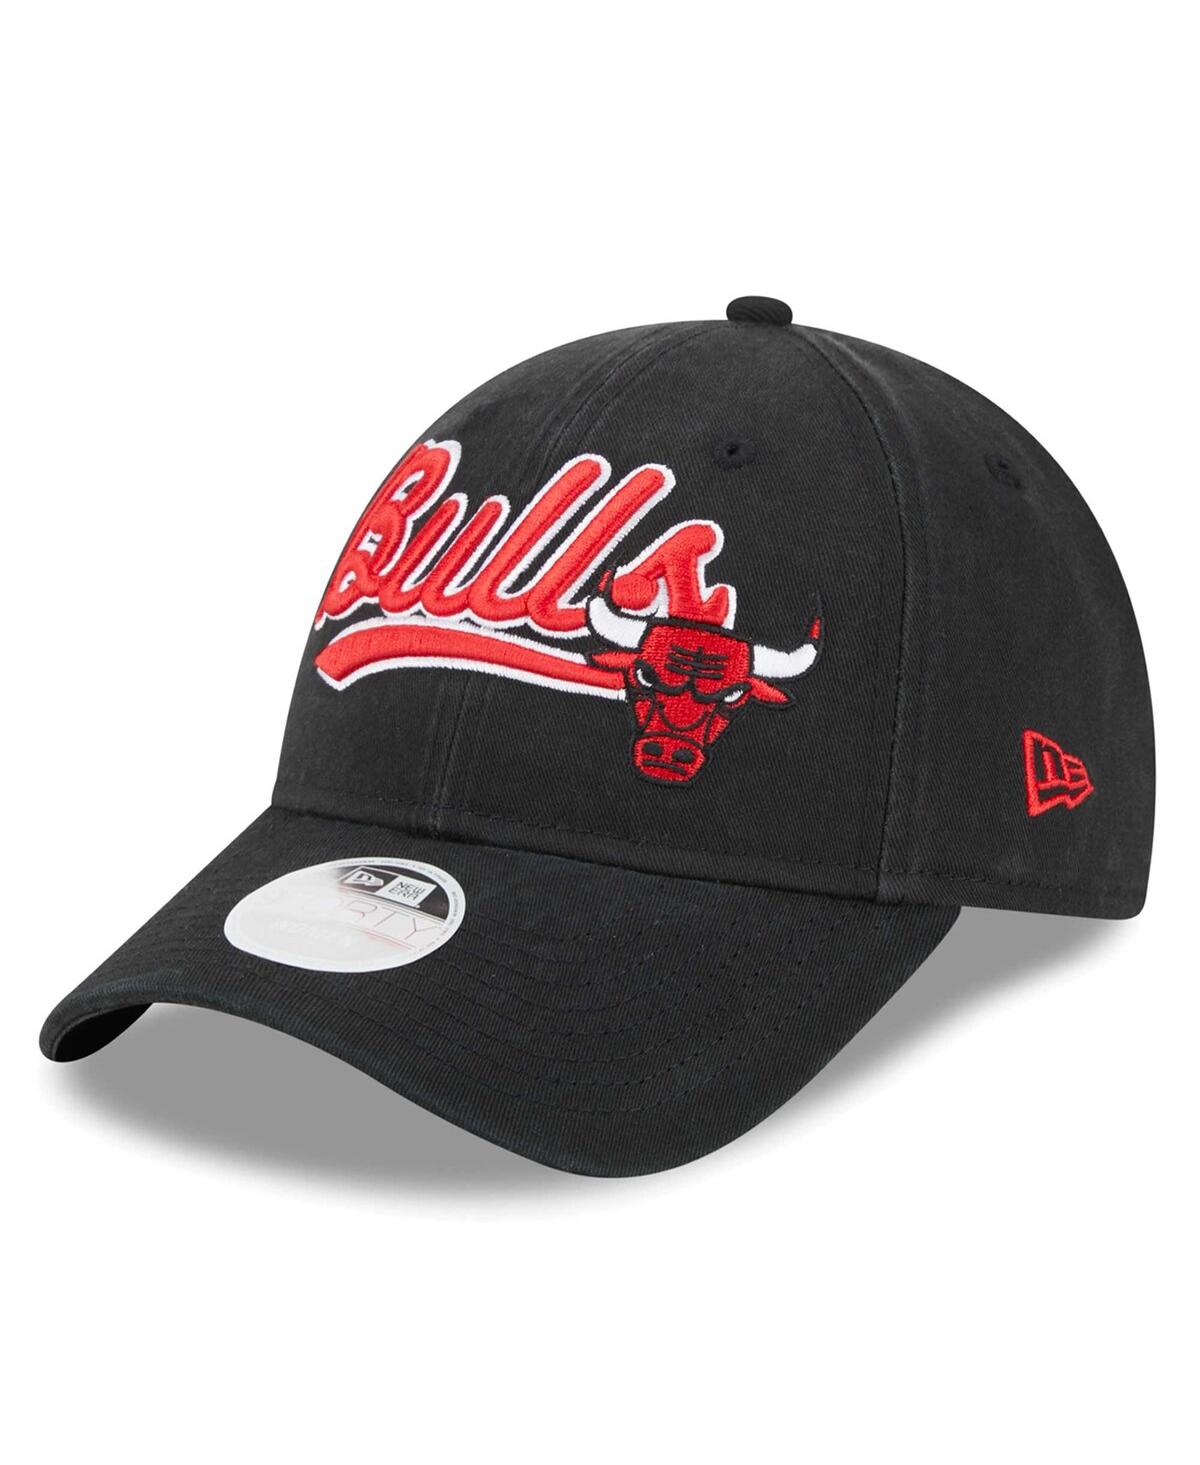 Shop New Era Women's  Black Chicago Bulls Cheer Tail Sweep 9forty Adjustable Hat